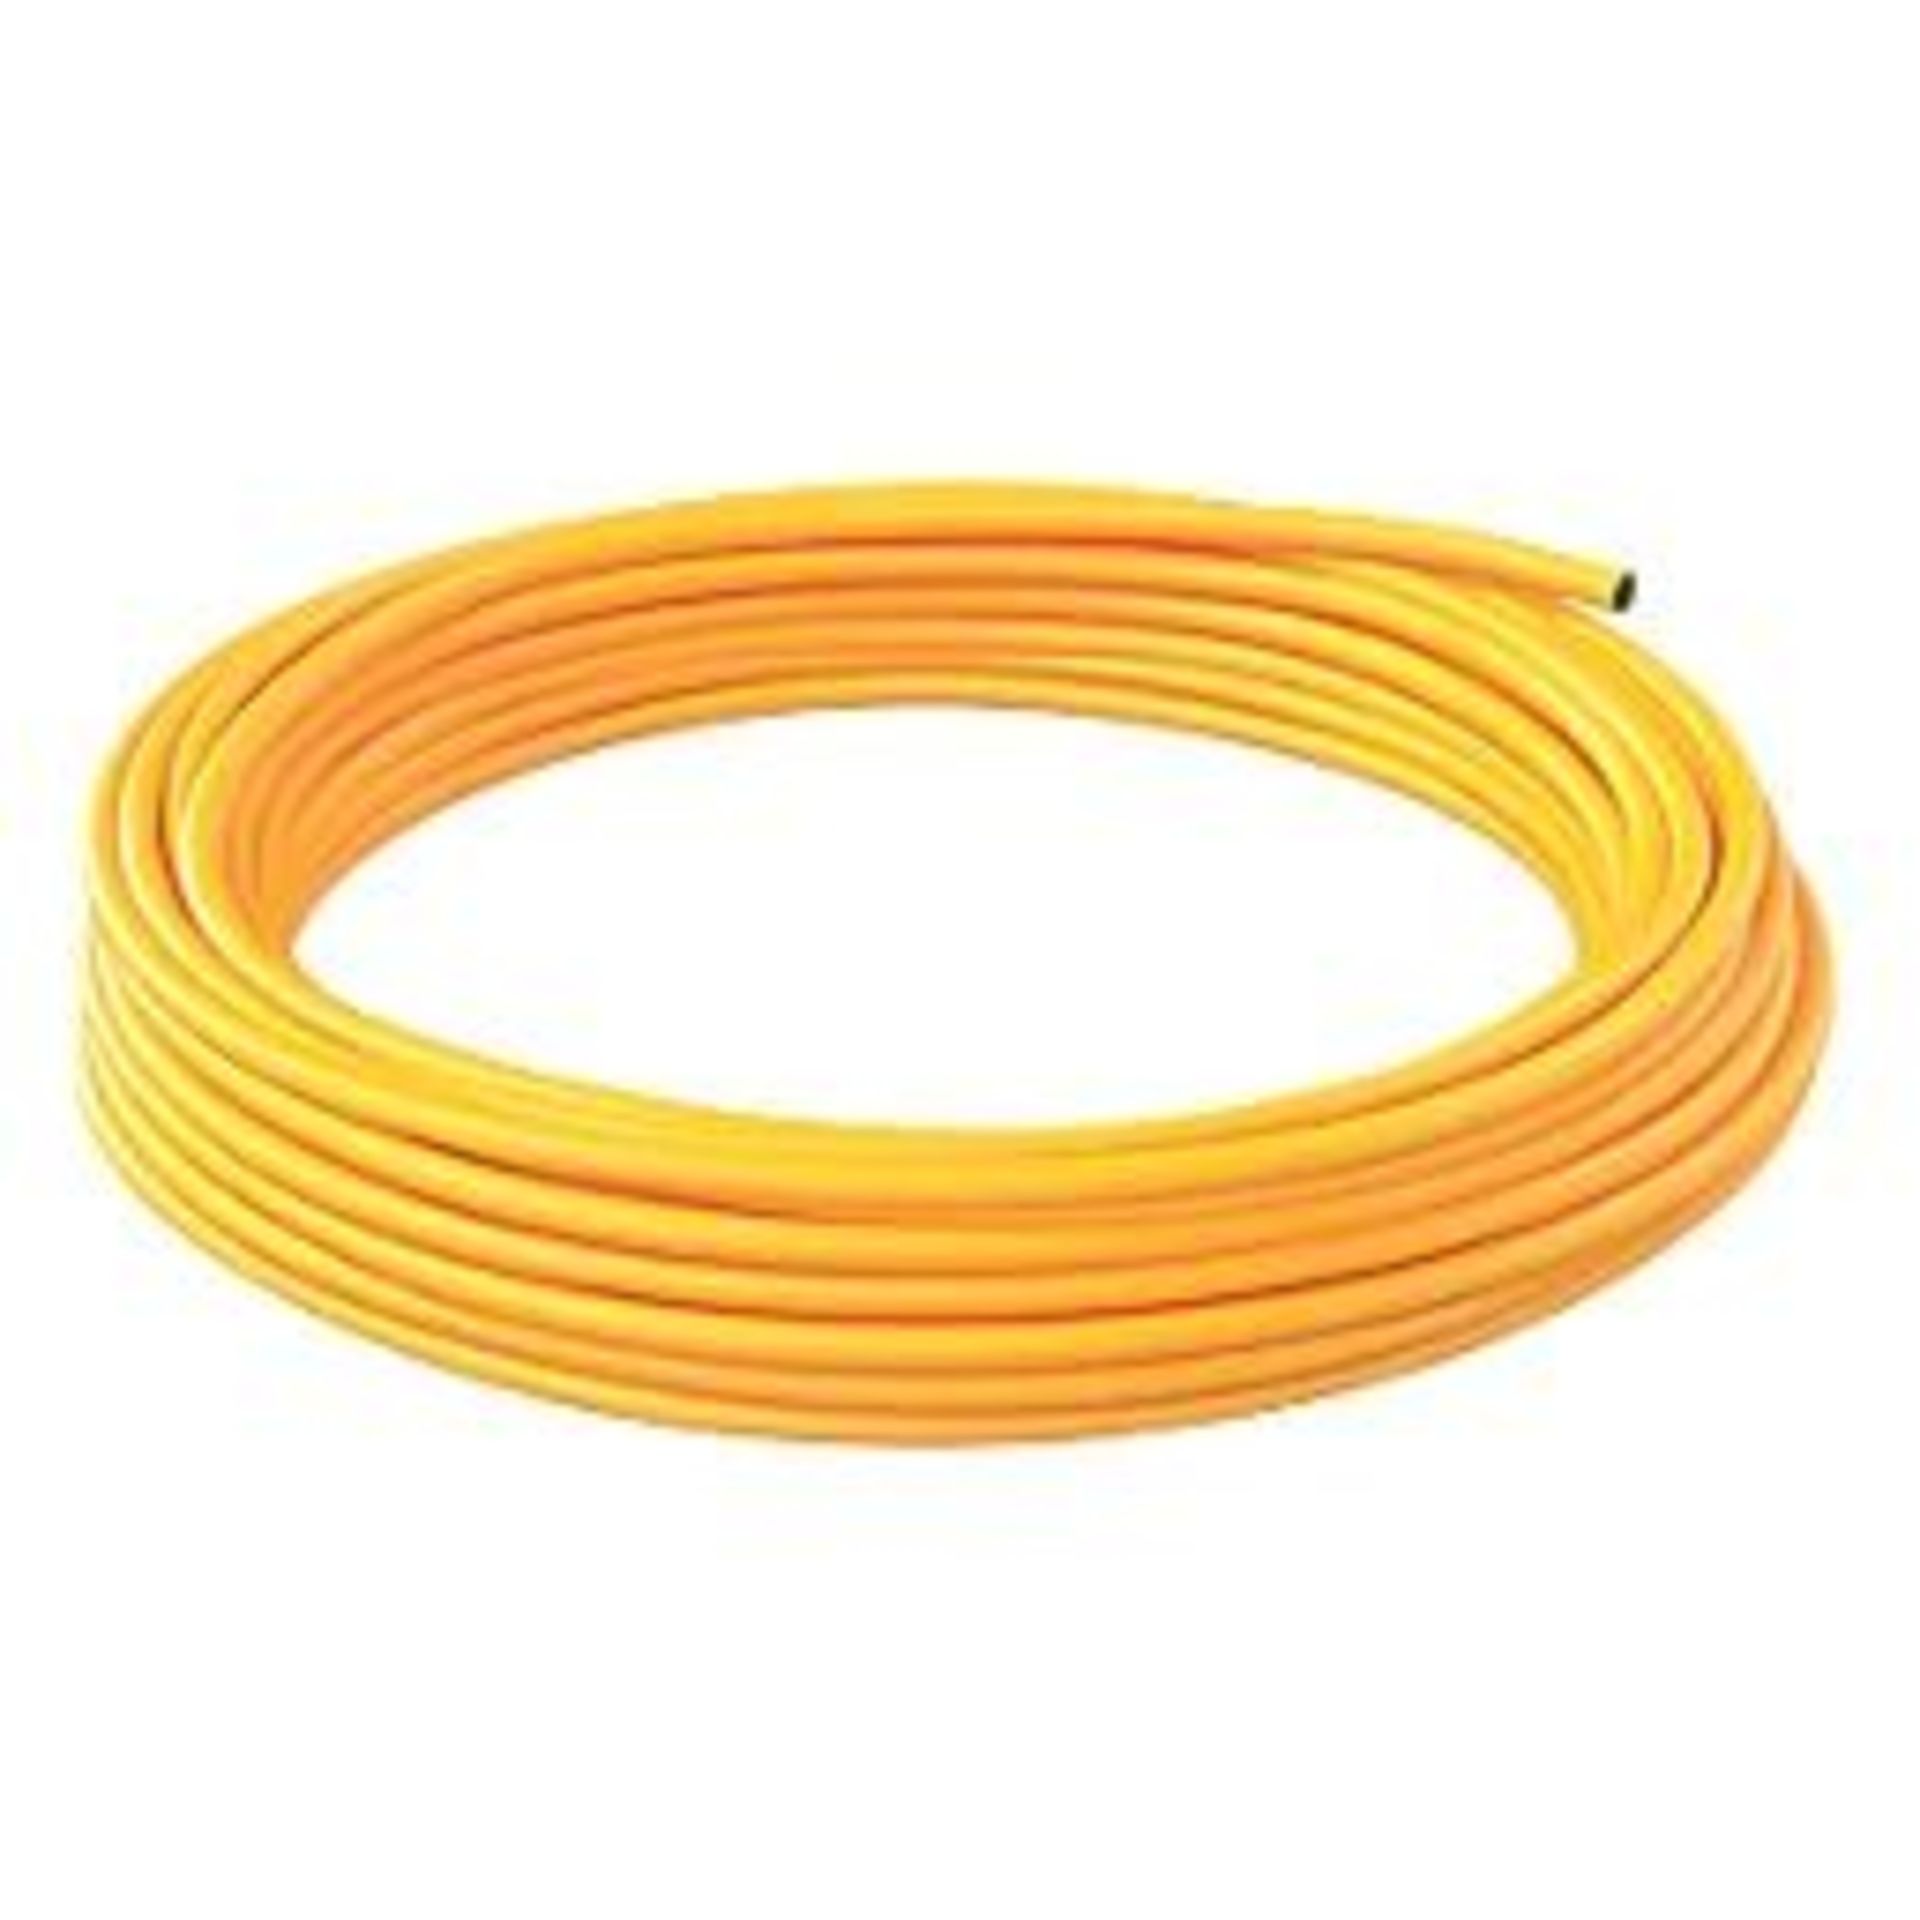 TITAN 50M GARDEN HOSE. - PW. Robust hose for general gardening use. Suitable for large-sized